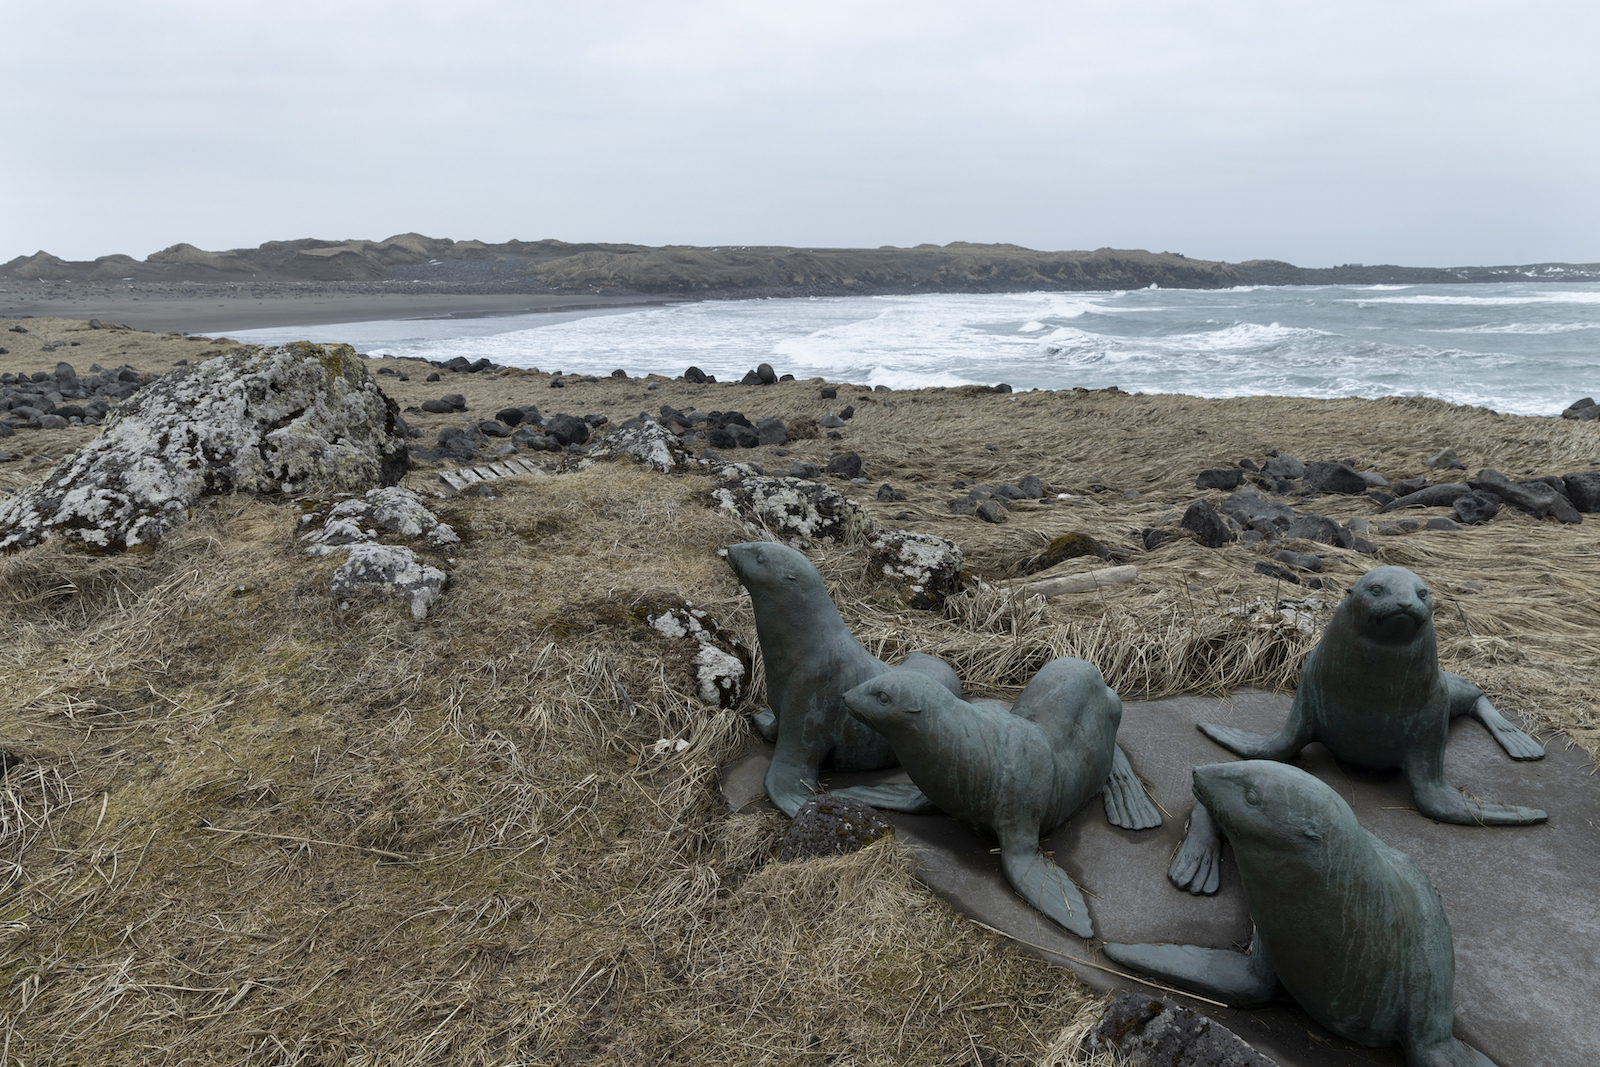 A statue on the beach depicts three seals